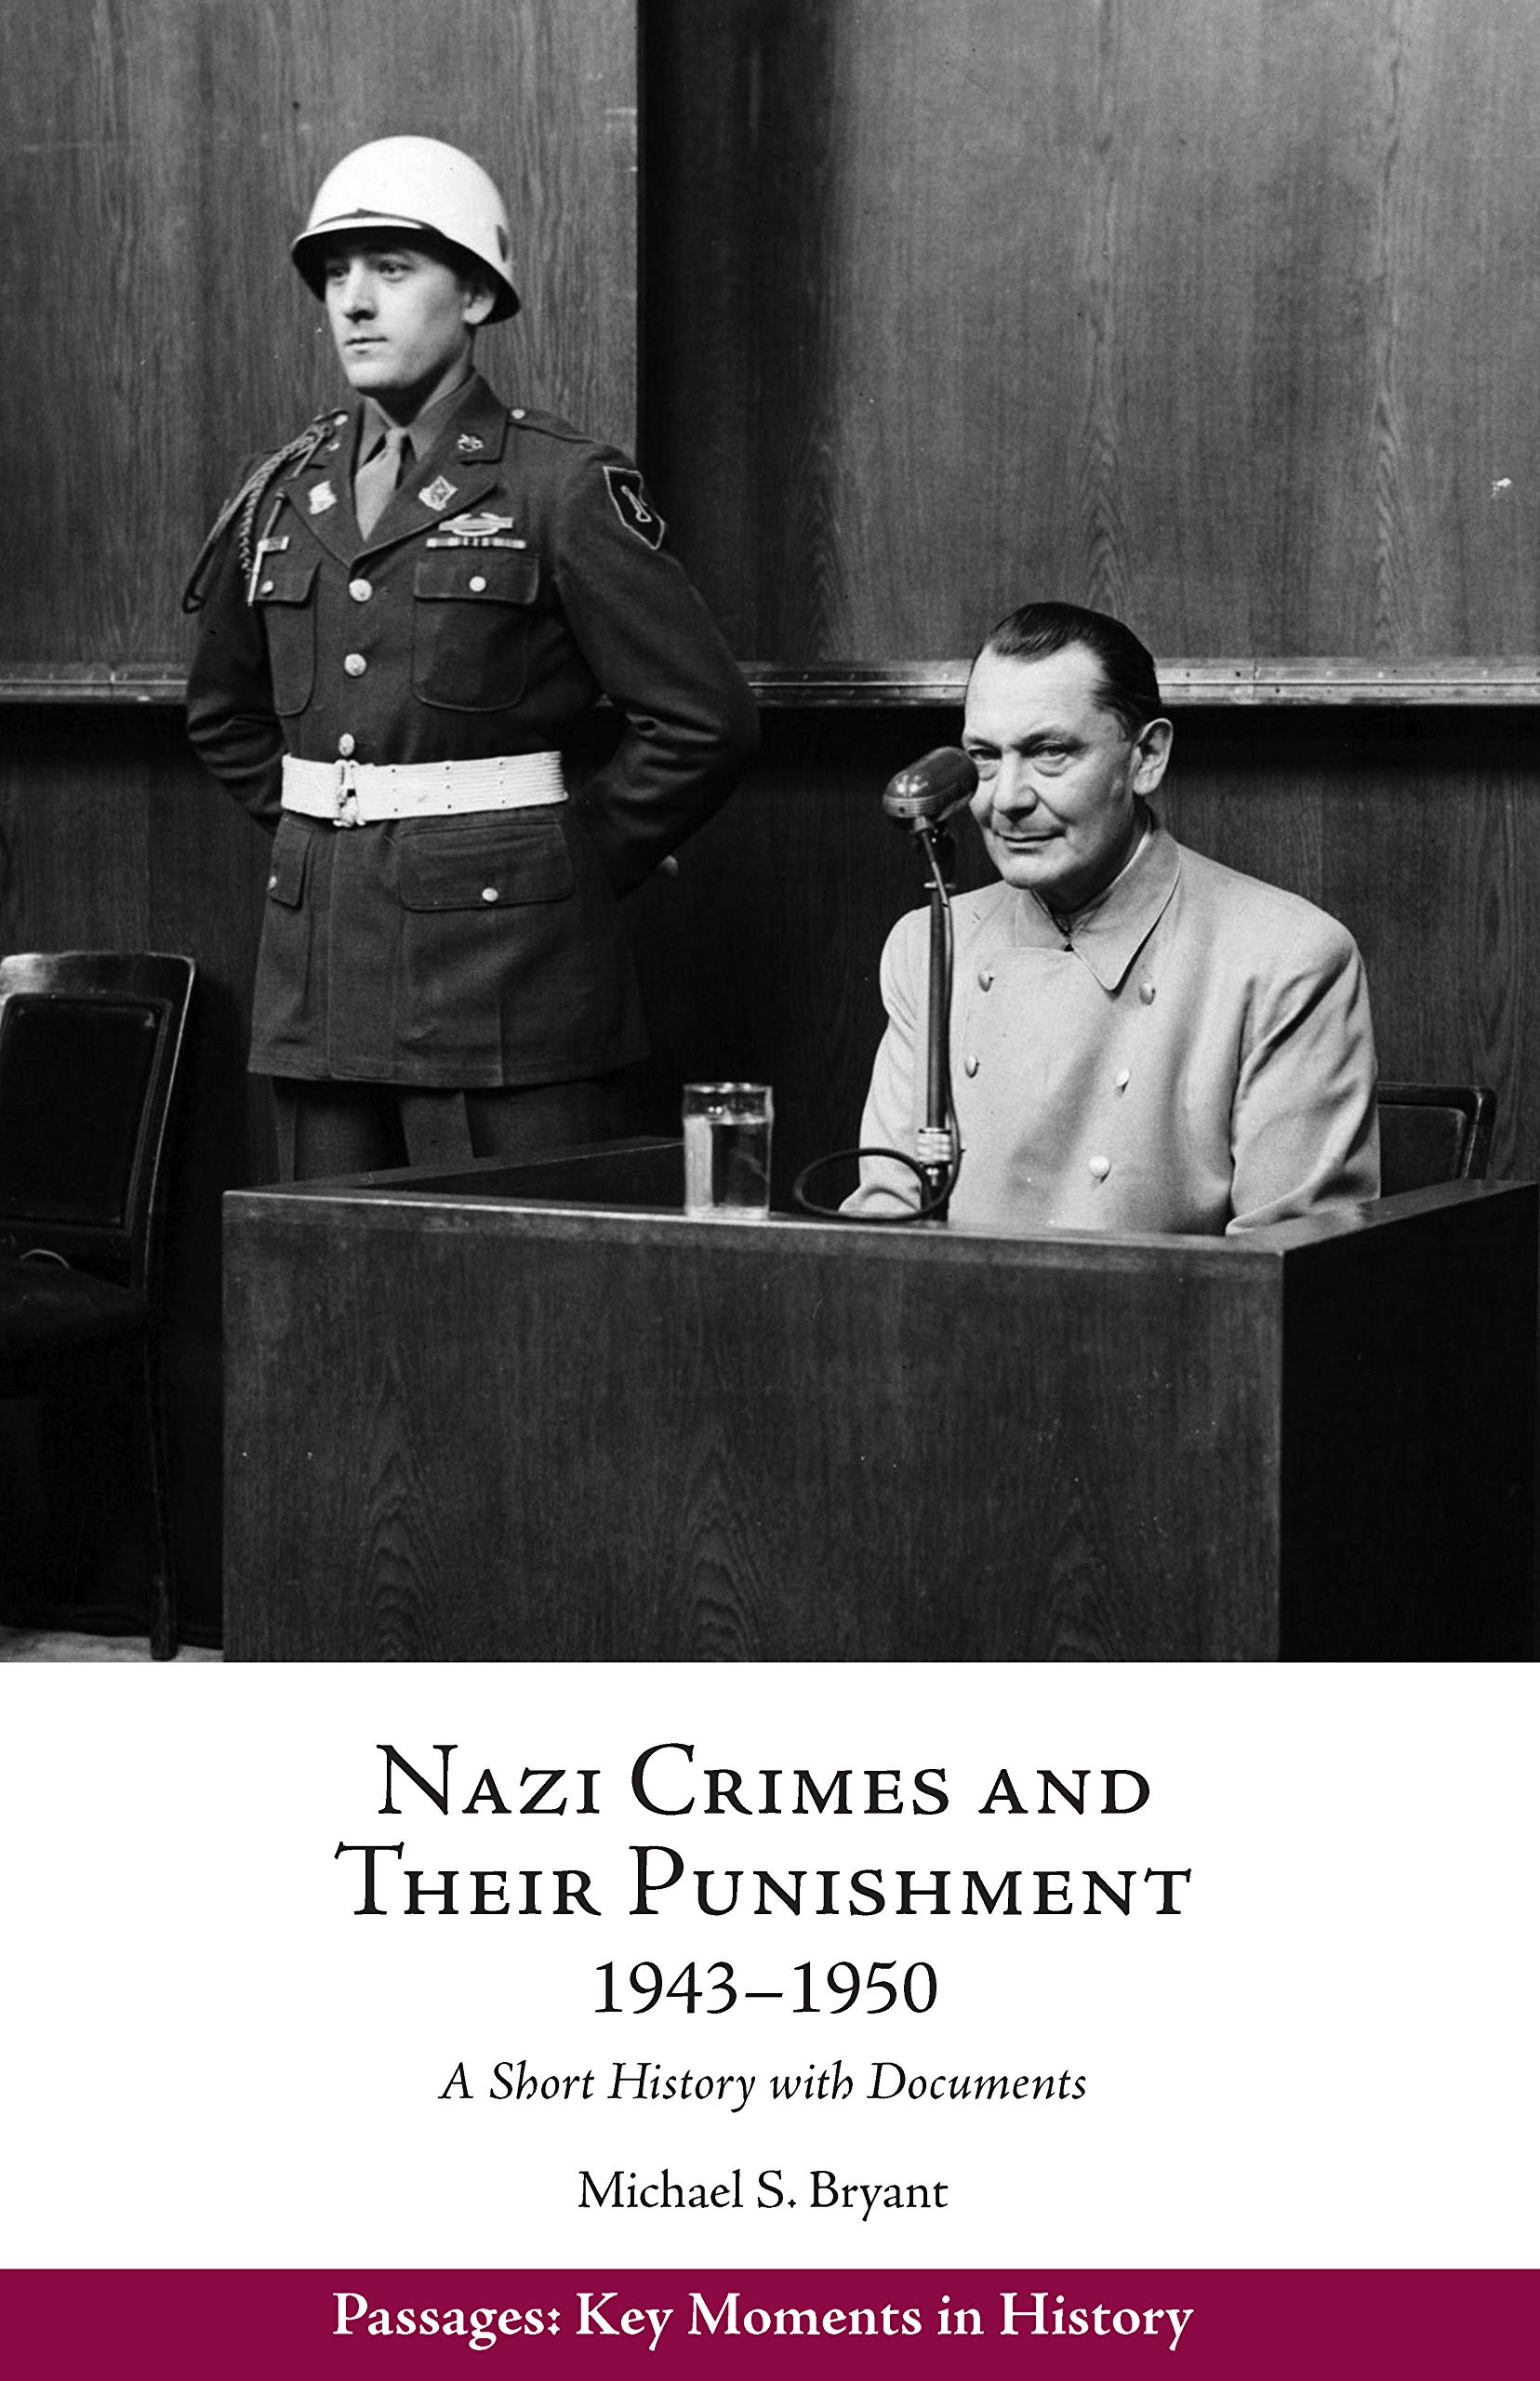 Nazi Crimes and Their Punishment, 1943-1950 | Michael S. Bryant